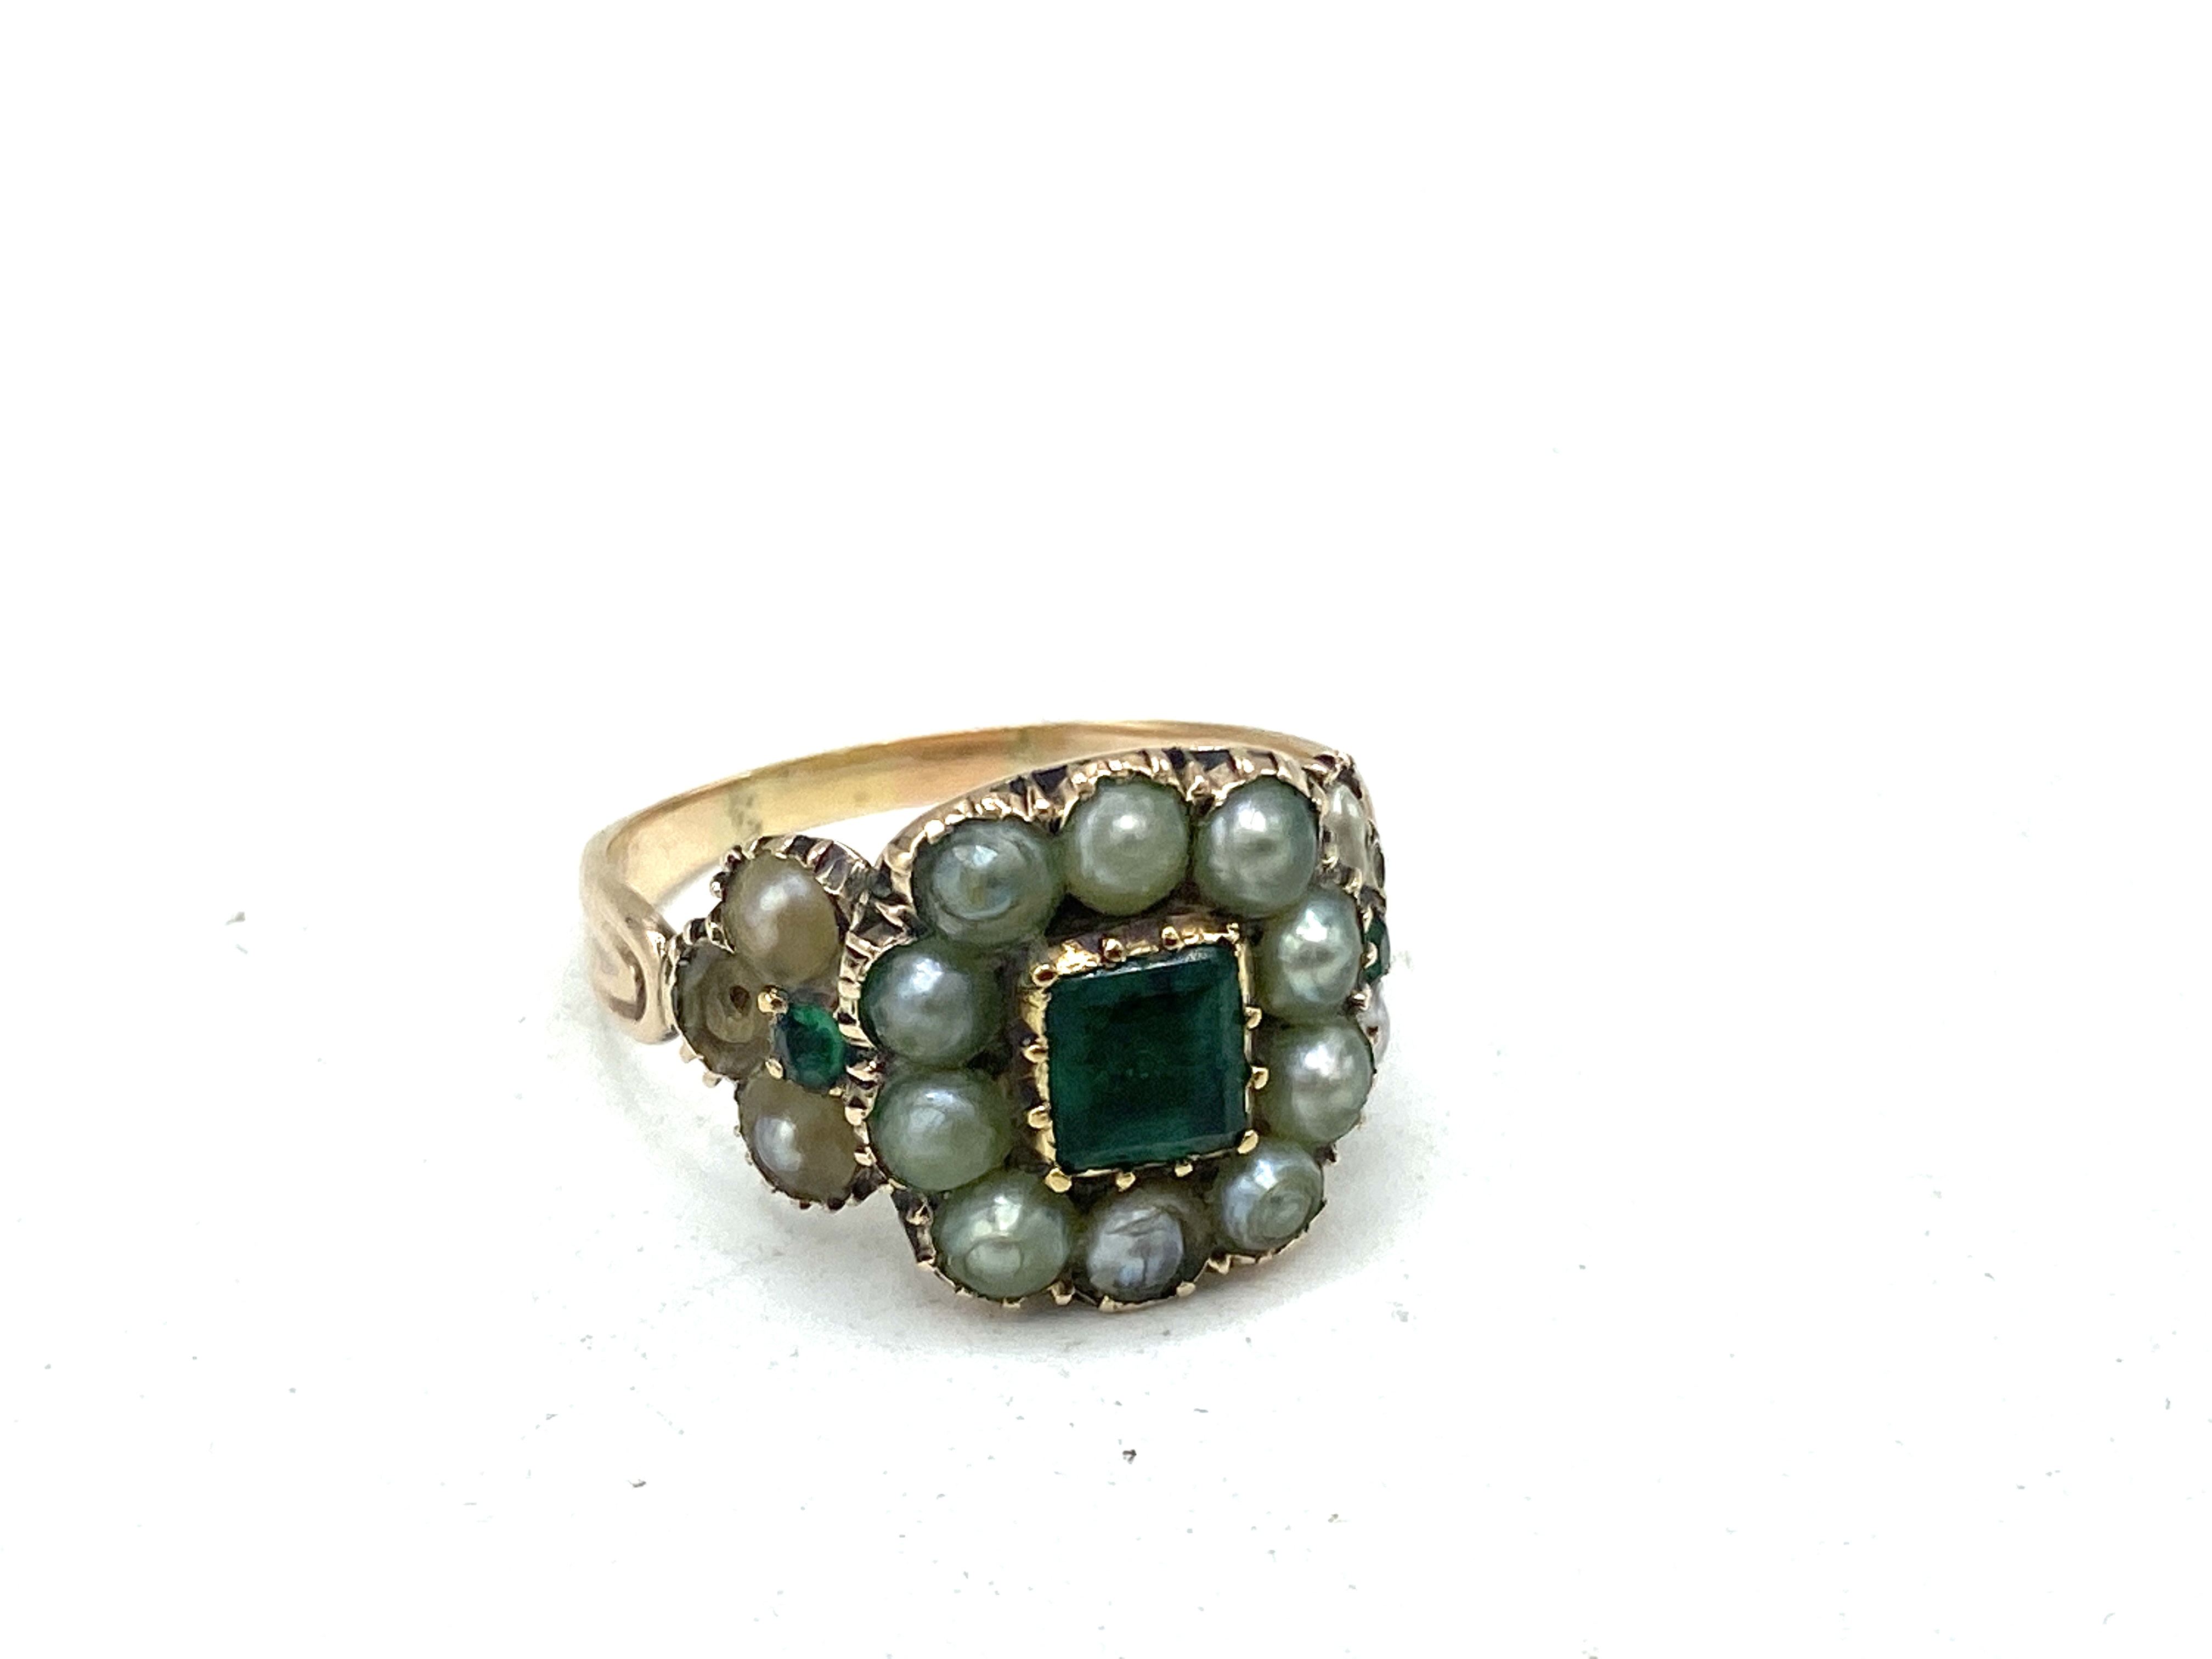 19th century emerald and pearl ring - Image 5 of 8